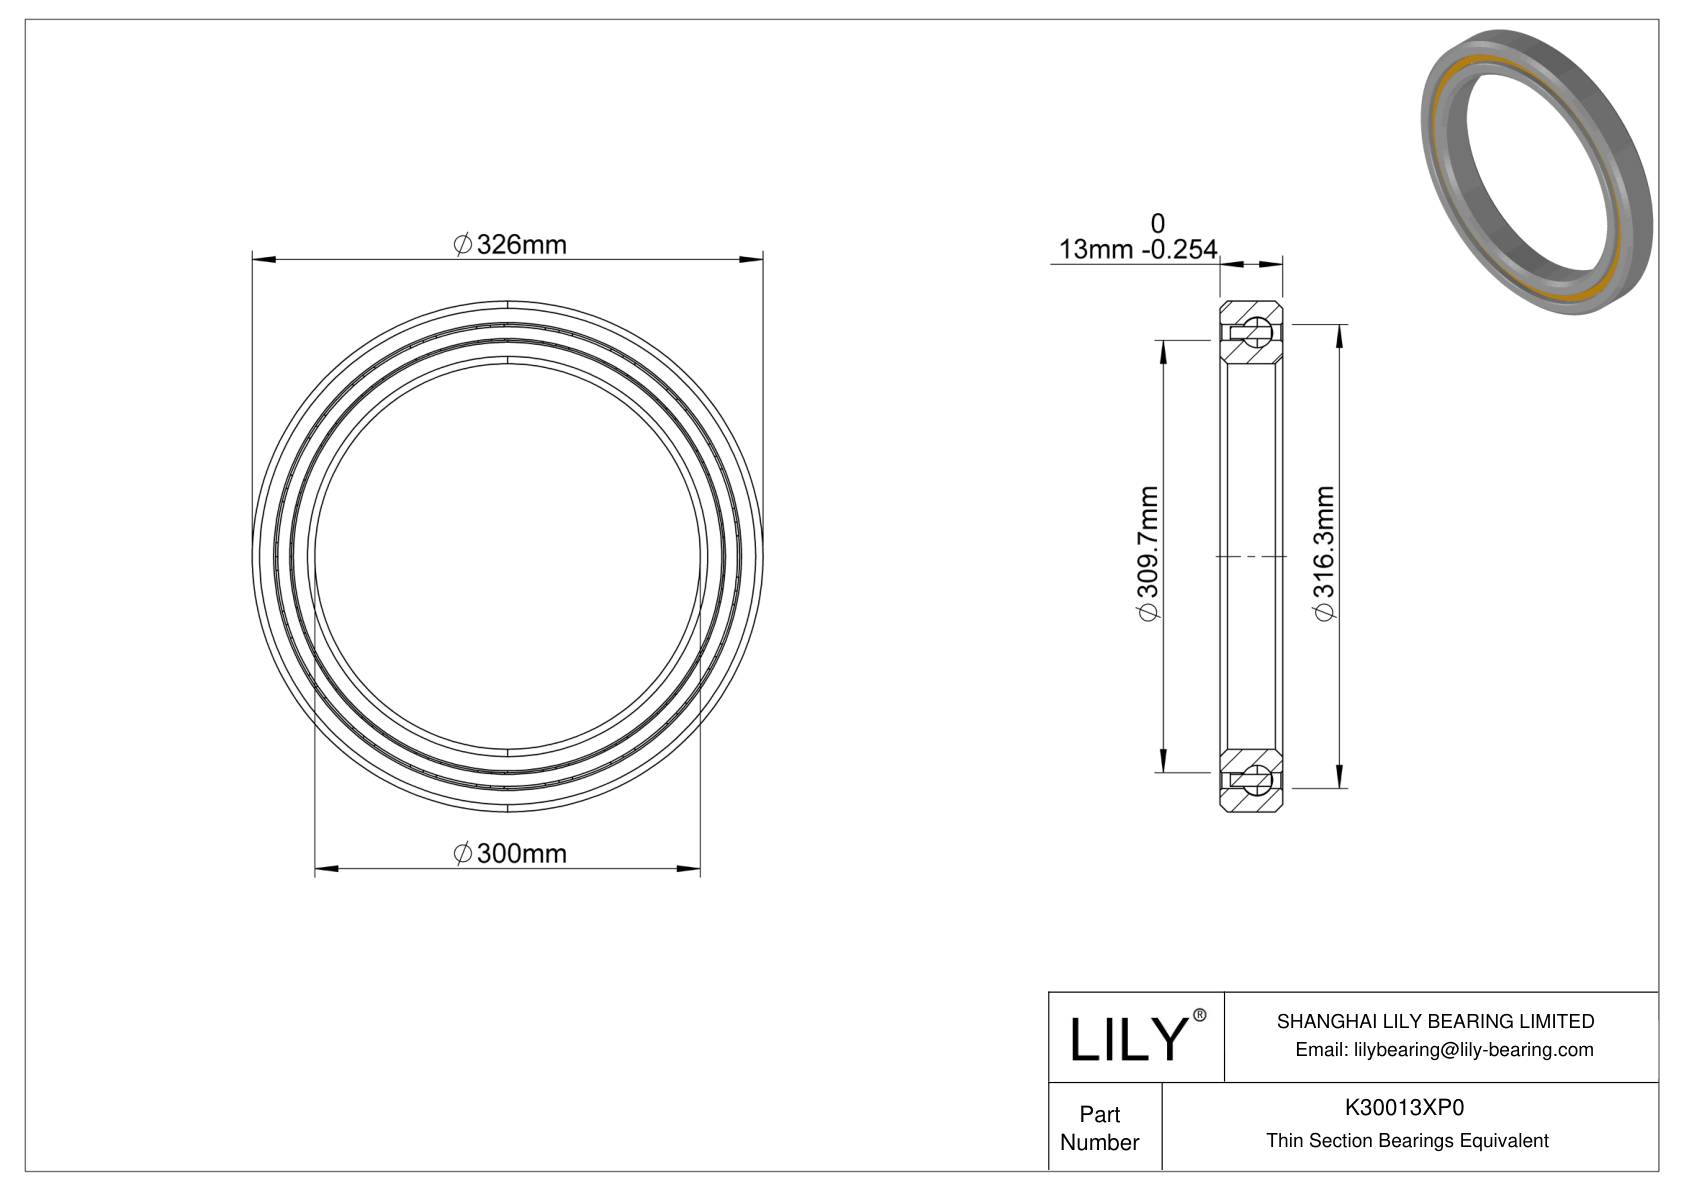 K30013XP0 Constant Section (CS) Bearings cad drawing